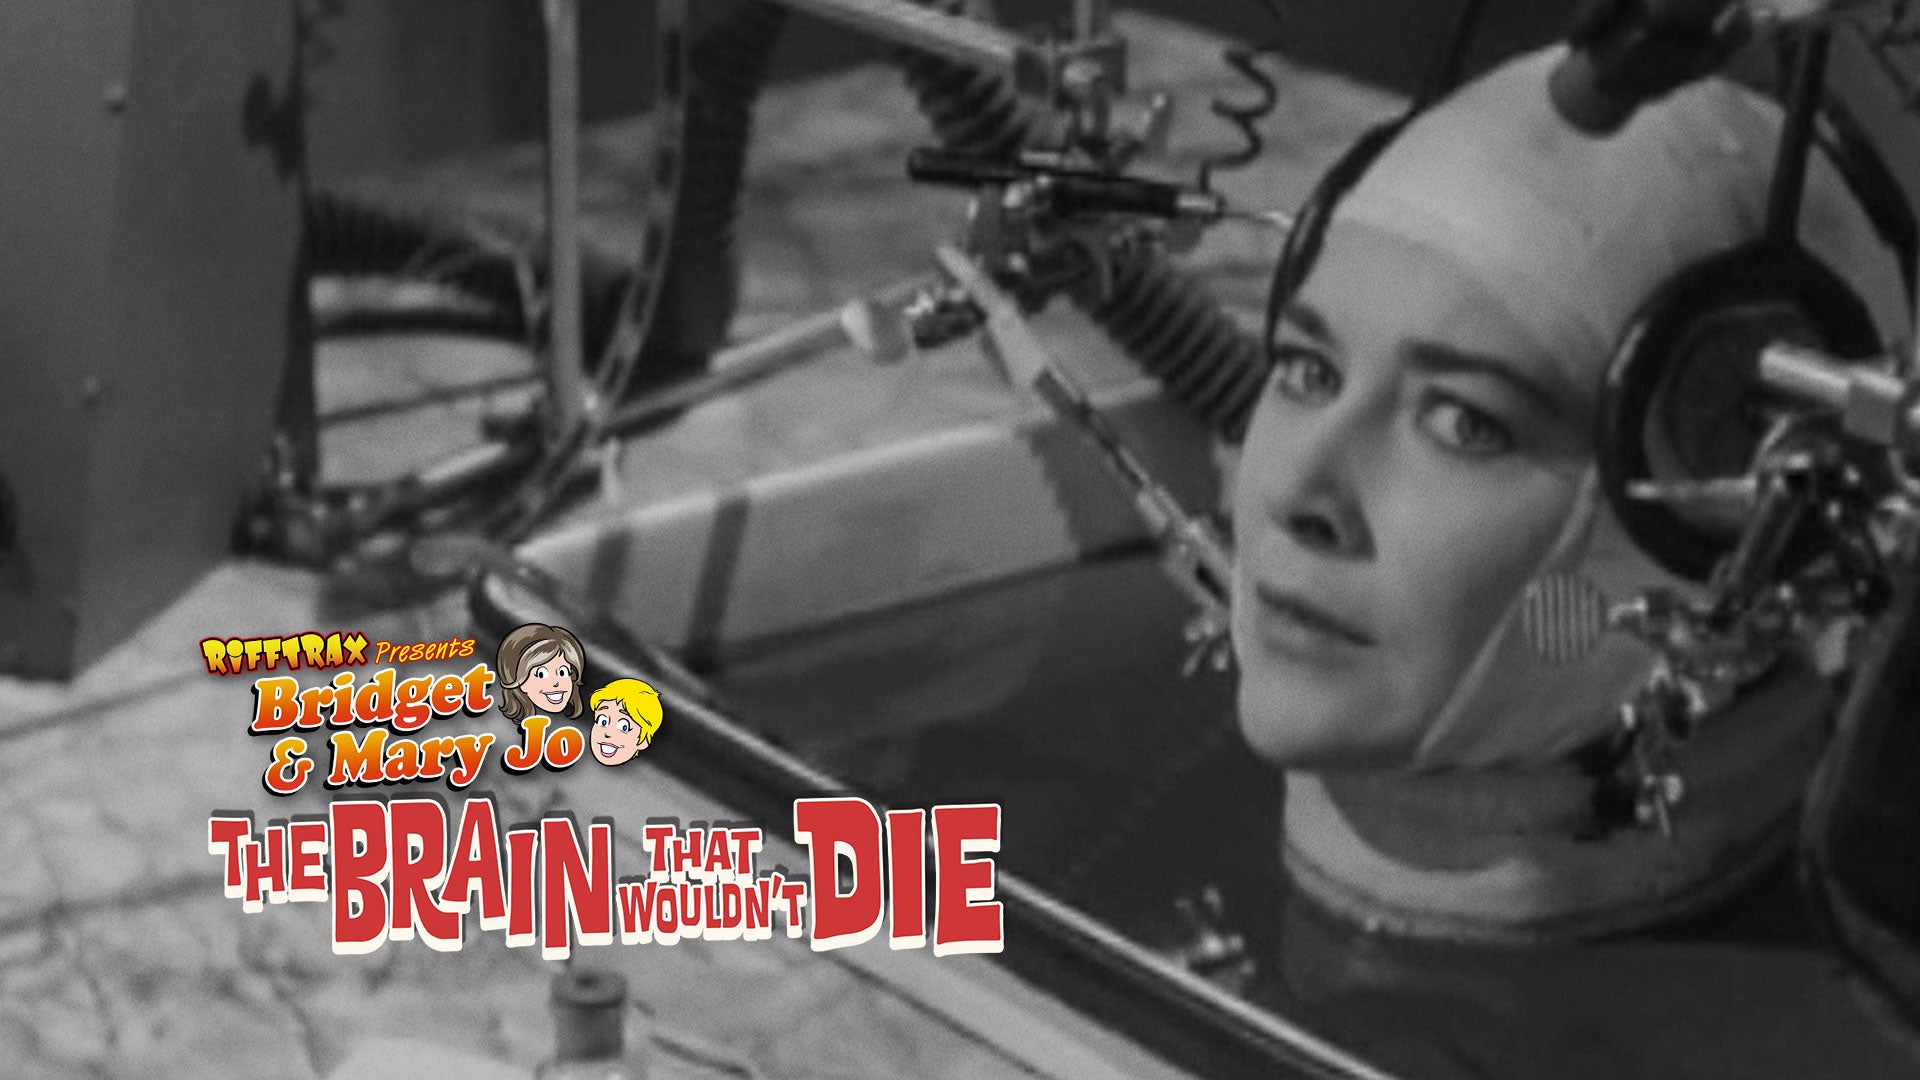 The Brain that Wouldn't Die, 1962 - Weed And Whiskey TV